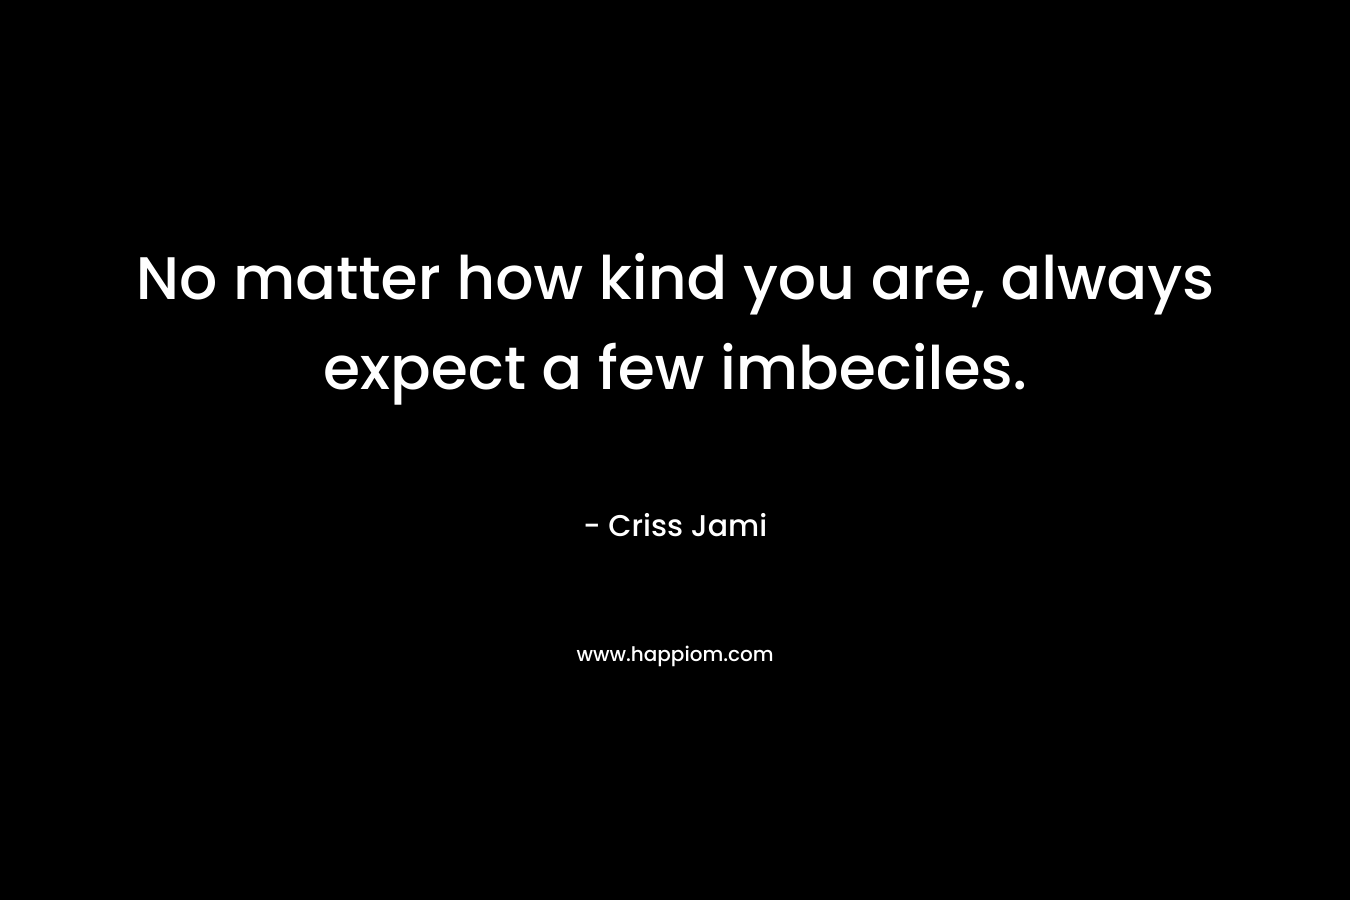 No matter how kind you are, always expect a few imbeciles. – Criss Jami